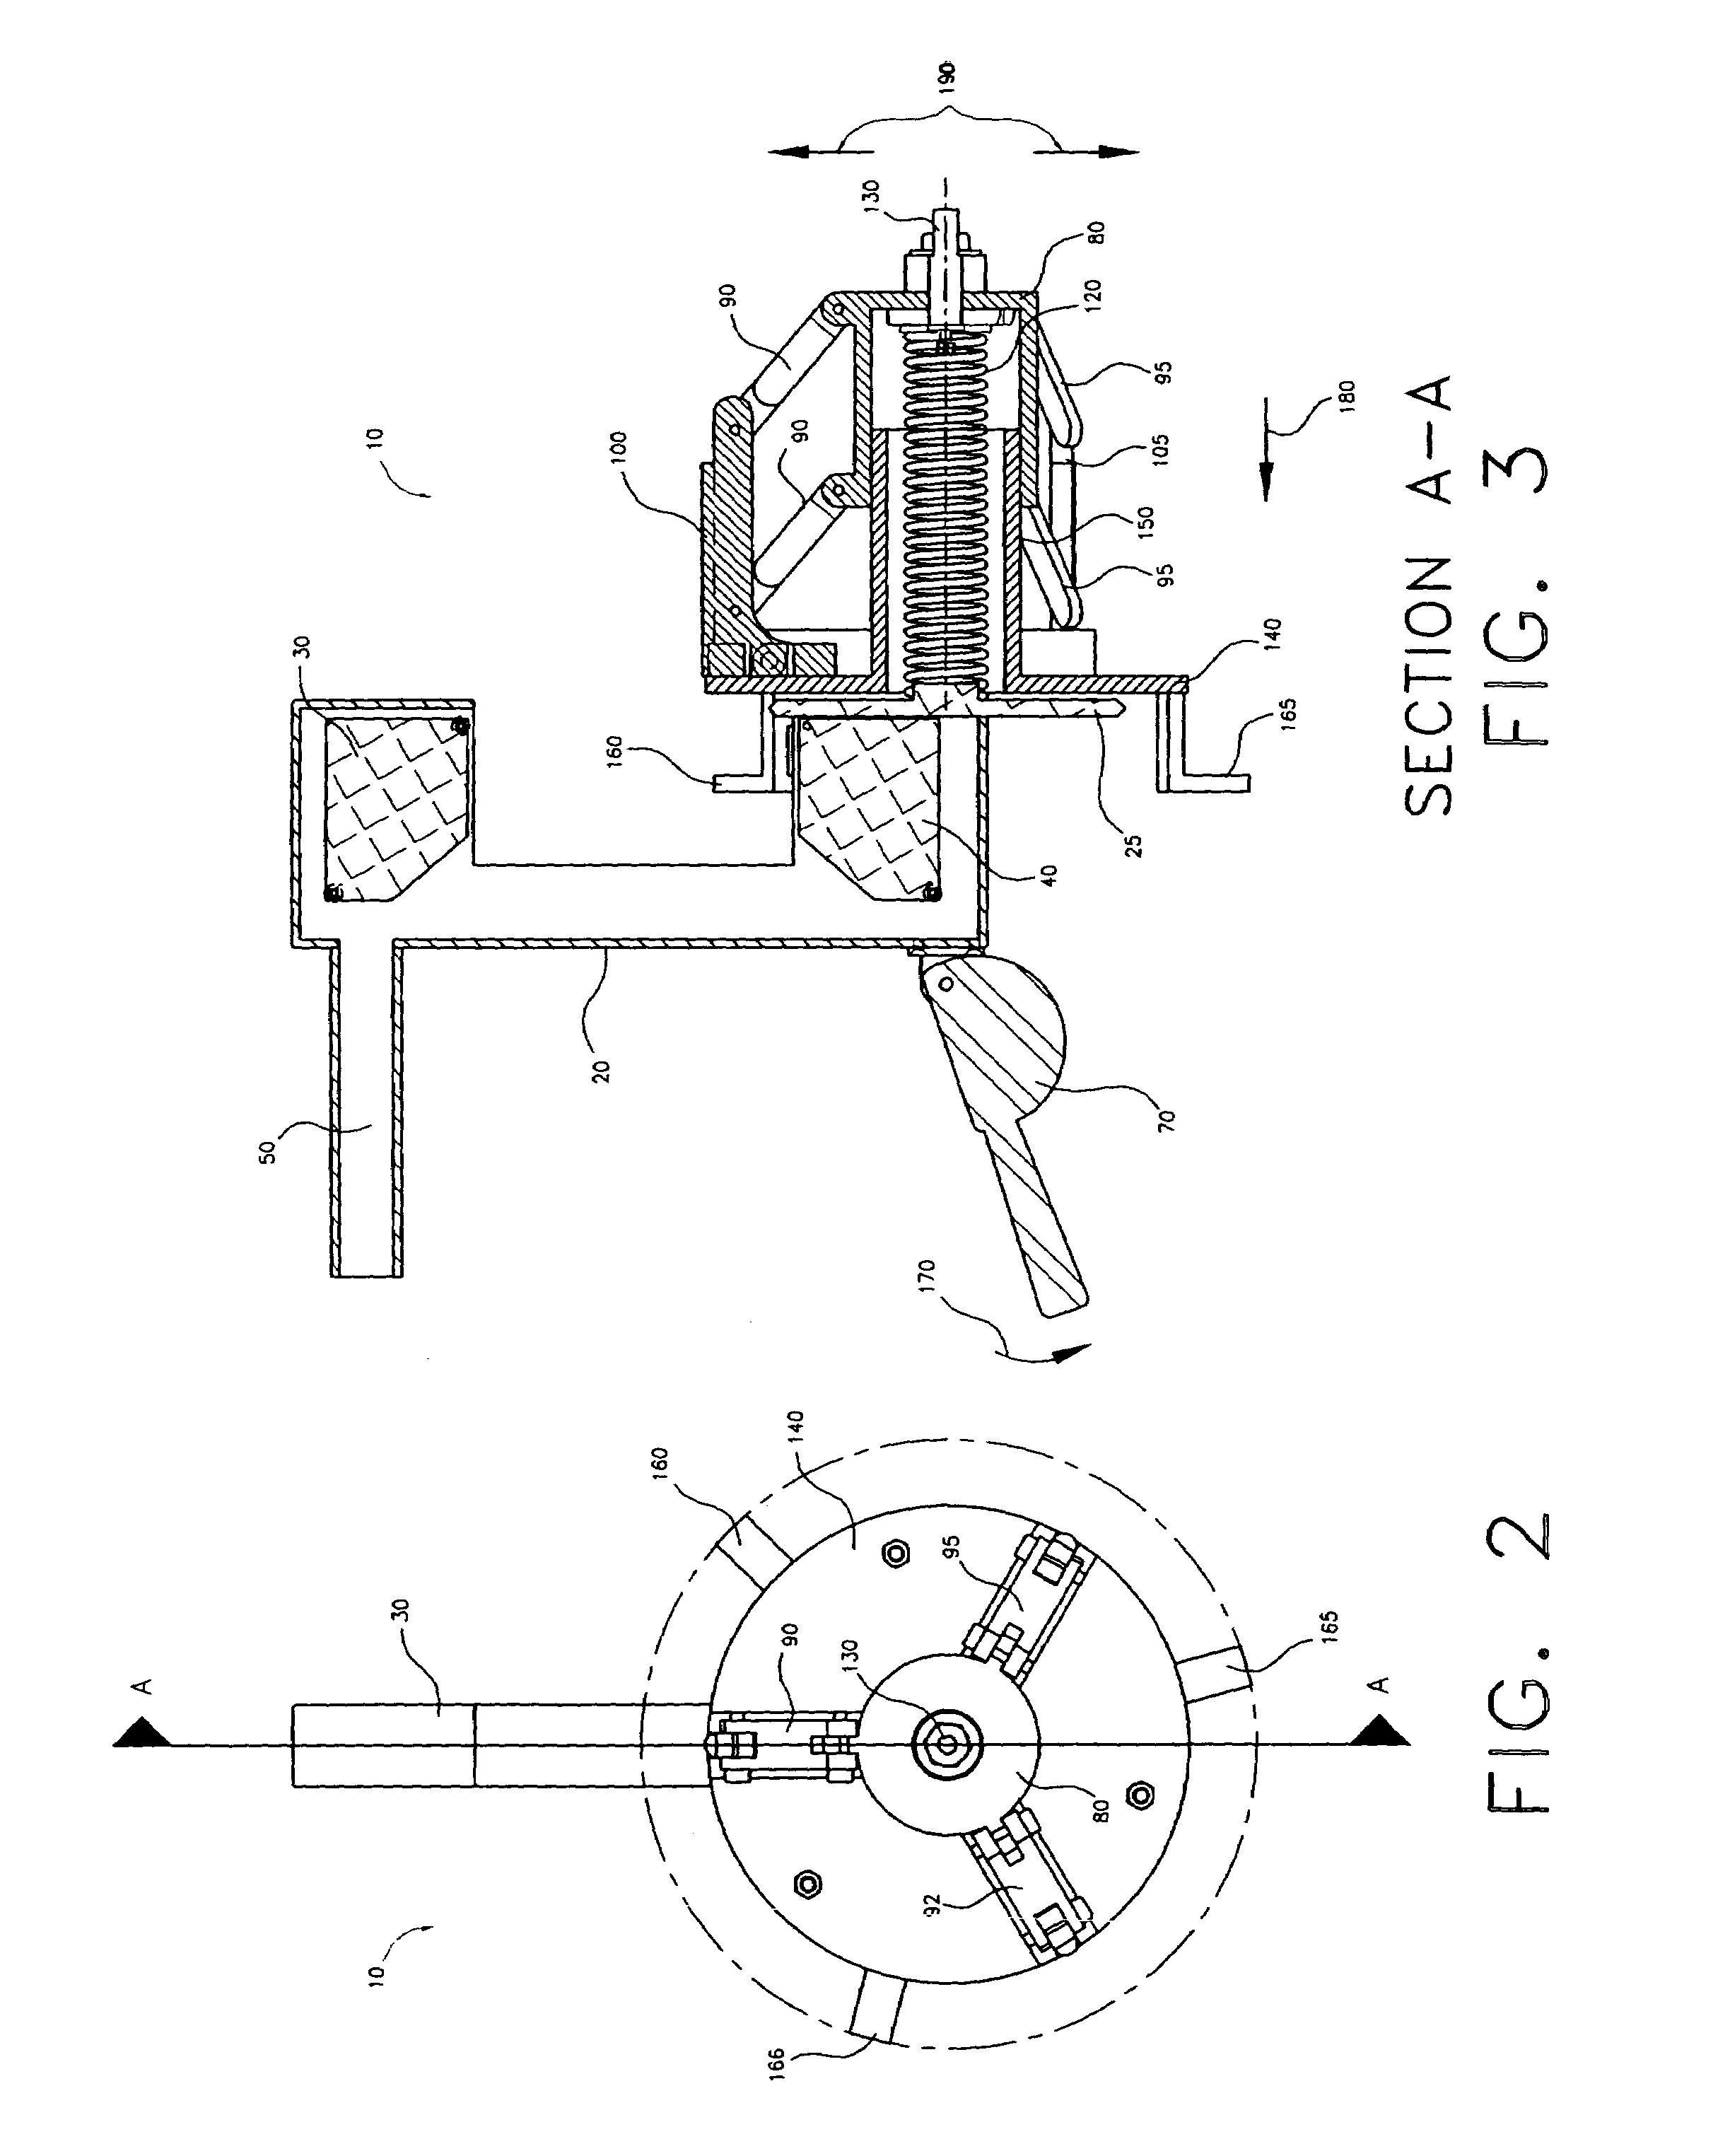 Method and apparatus for best fitting two or more items